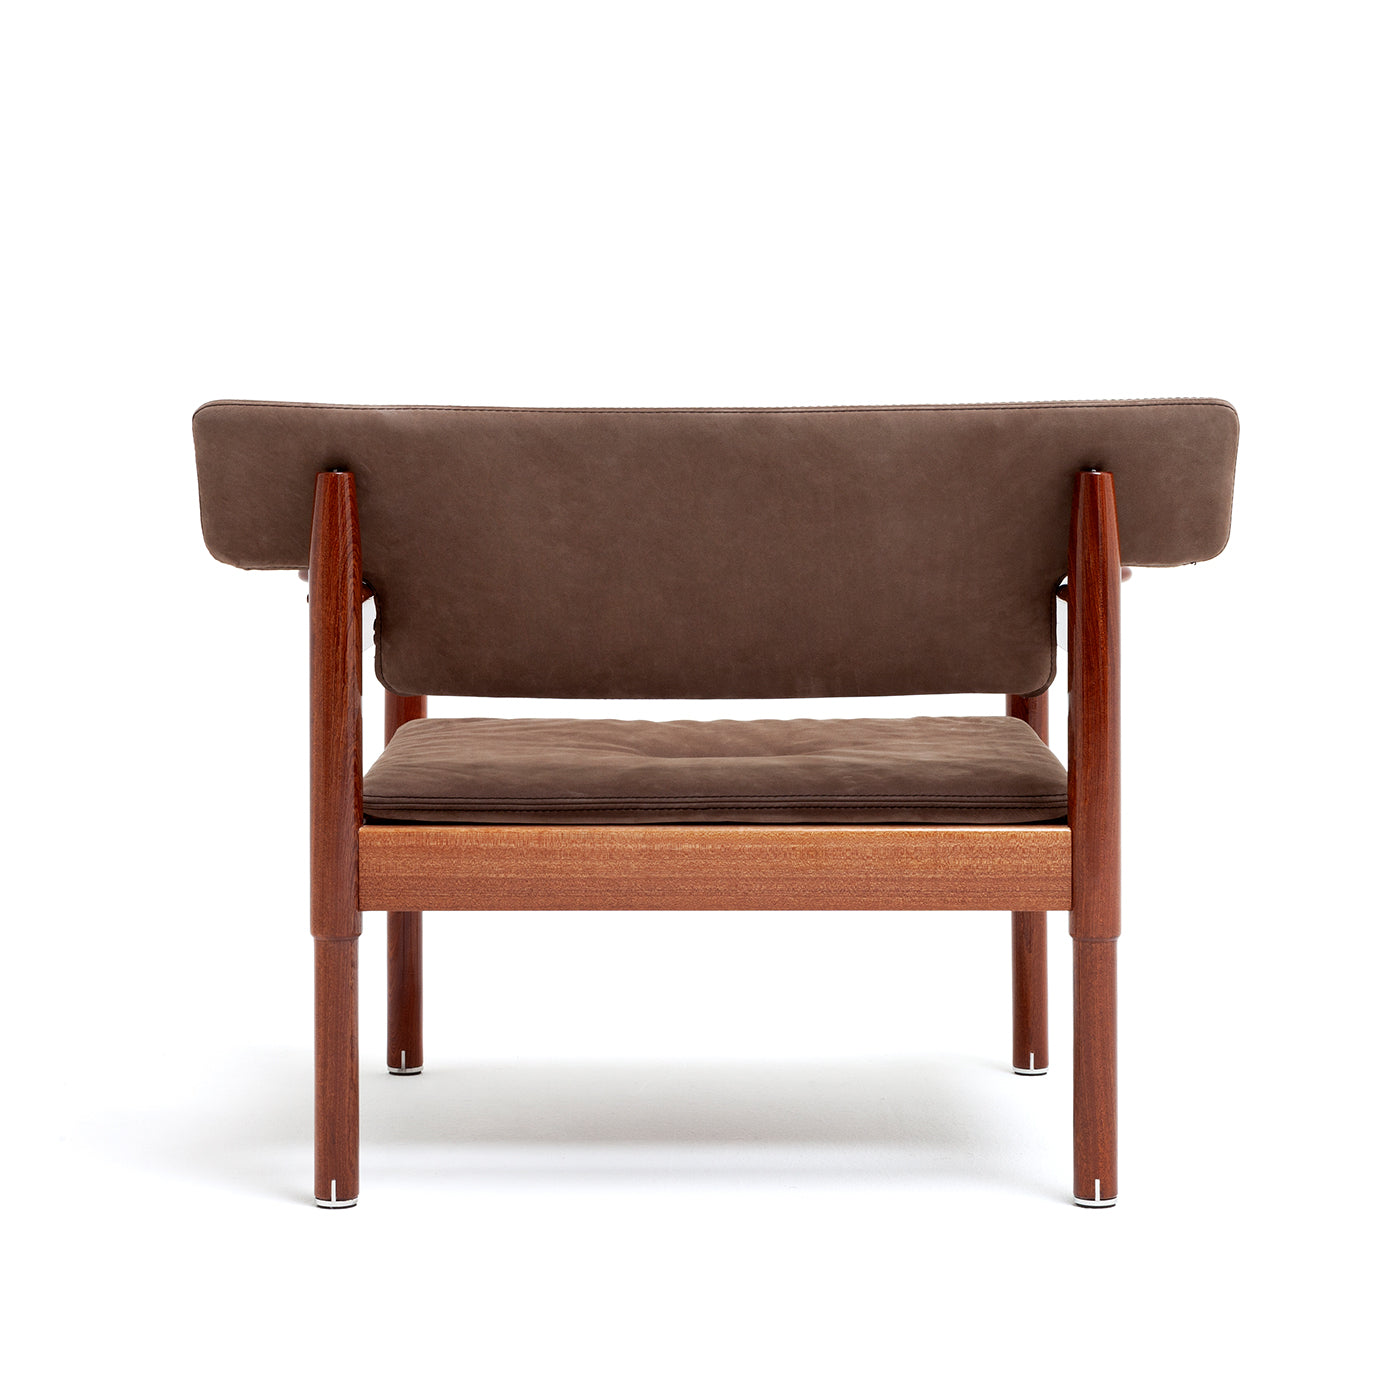 Vieste Large Brown Armchair by Massimo Castagna - Alternative view 5